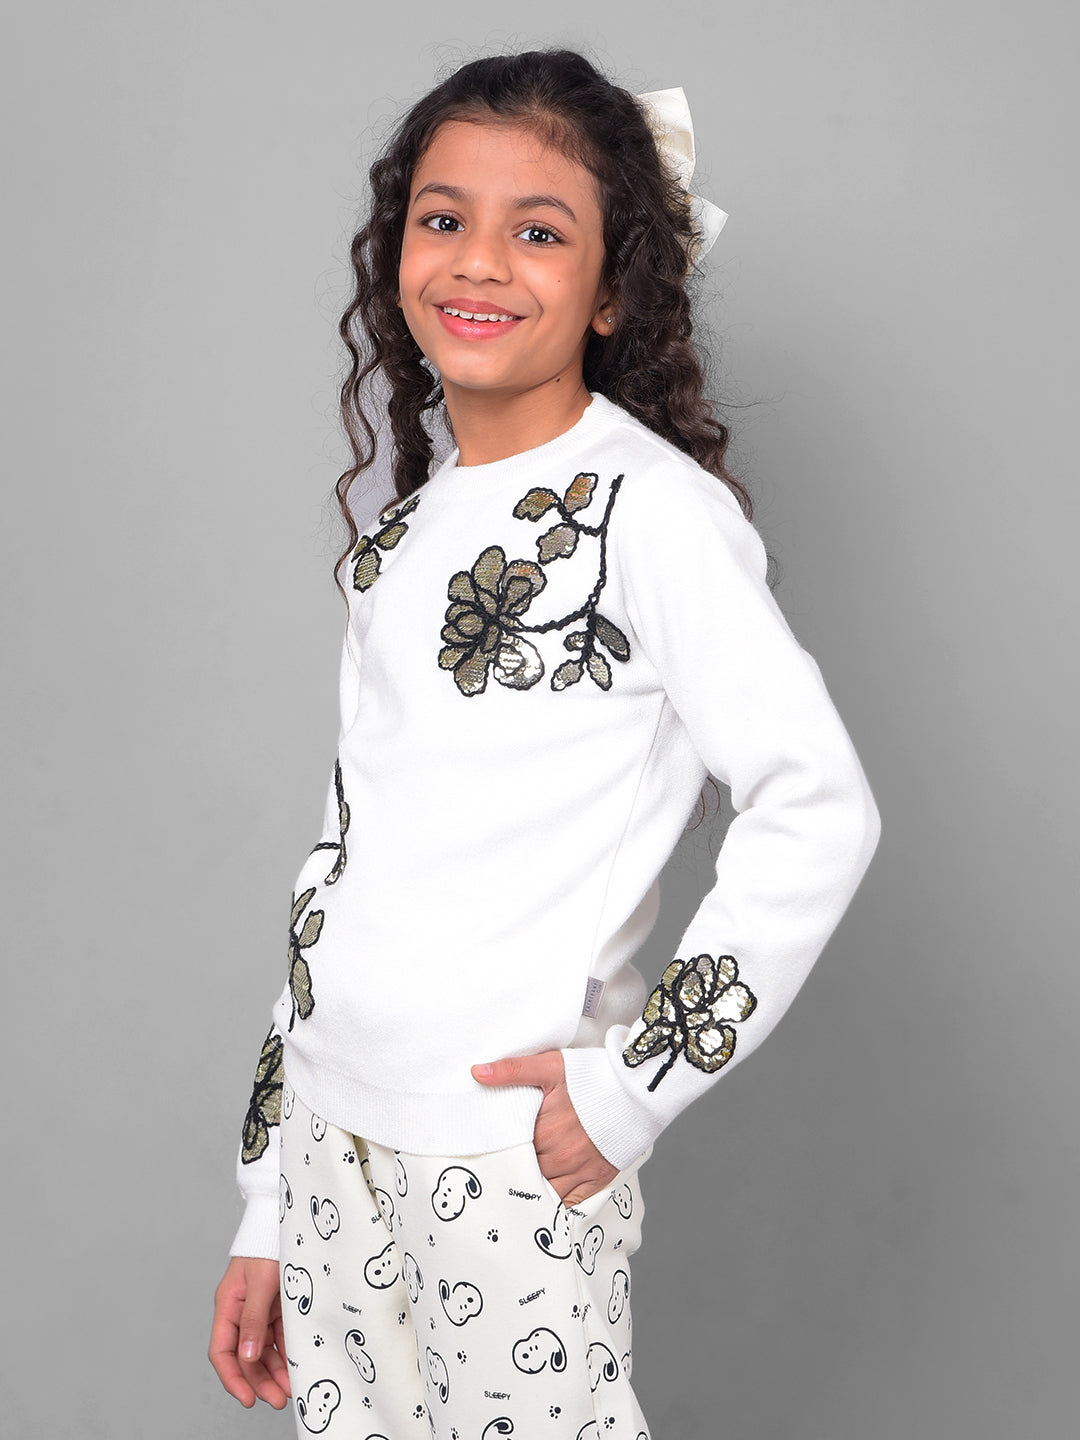 Off White Printed Floral Sweater-Girls Sweaters-Crimsoune Club